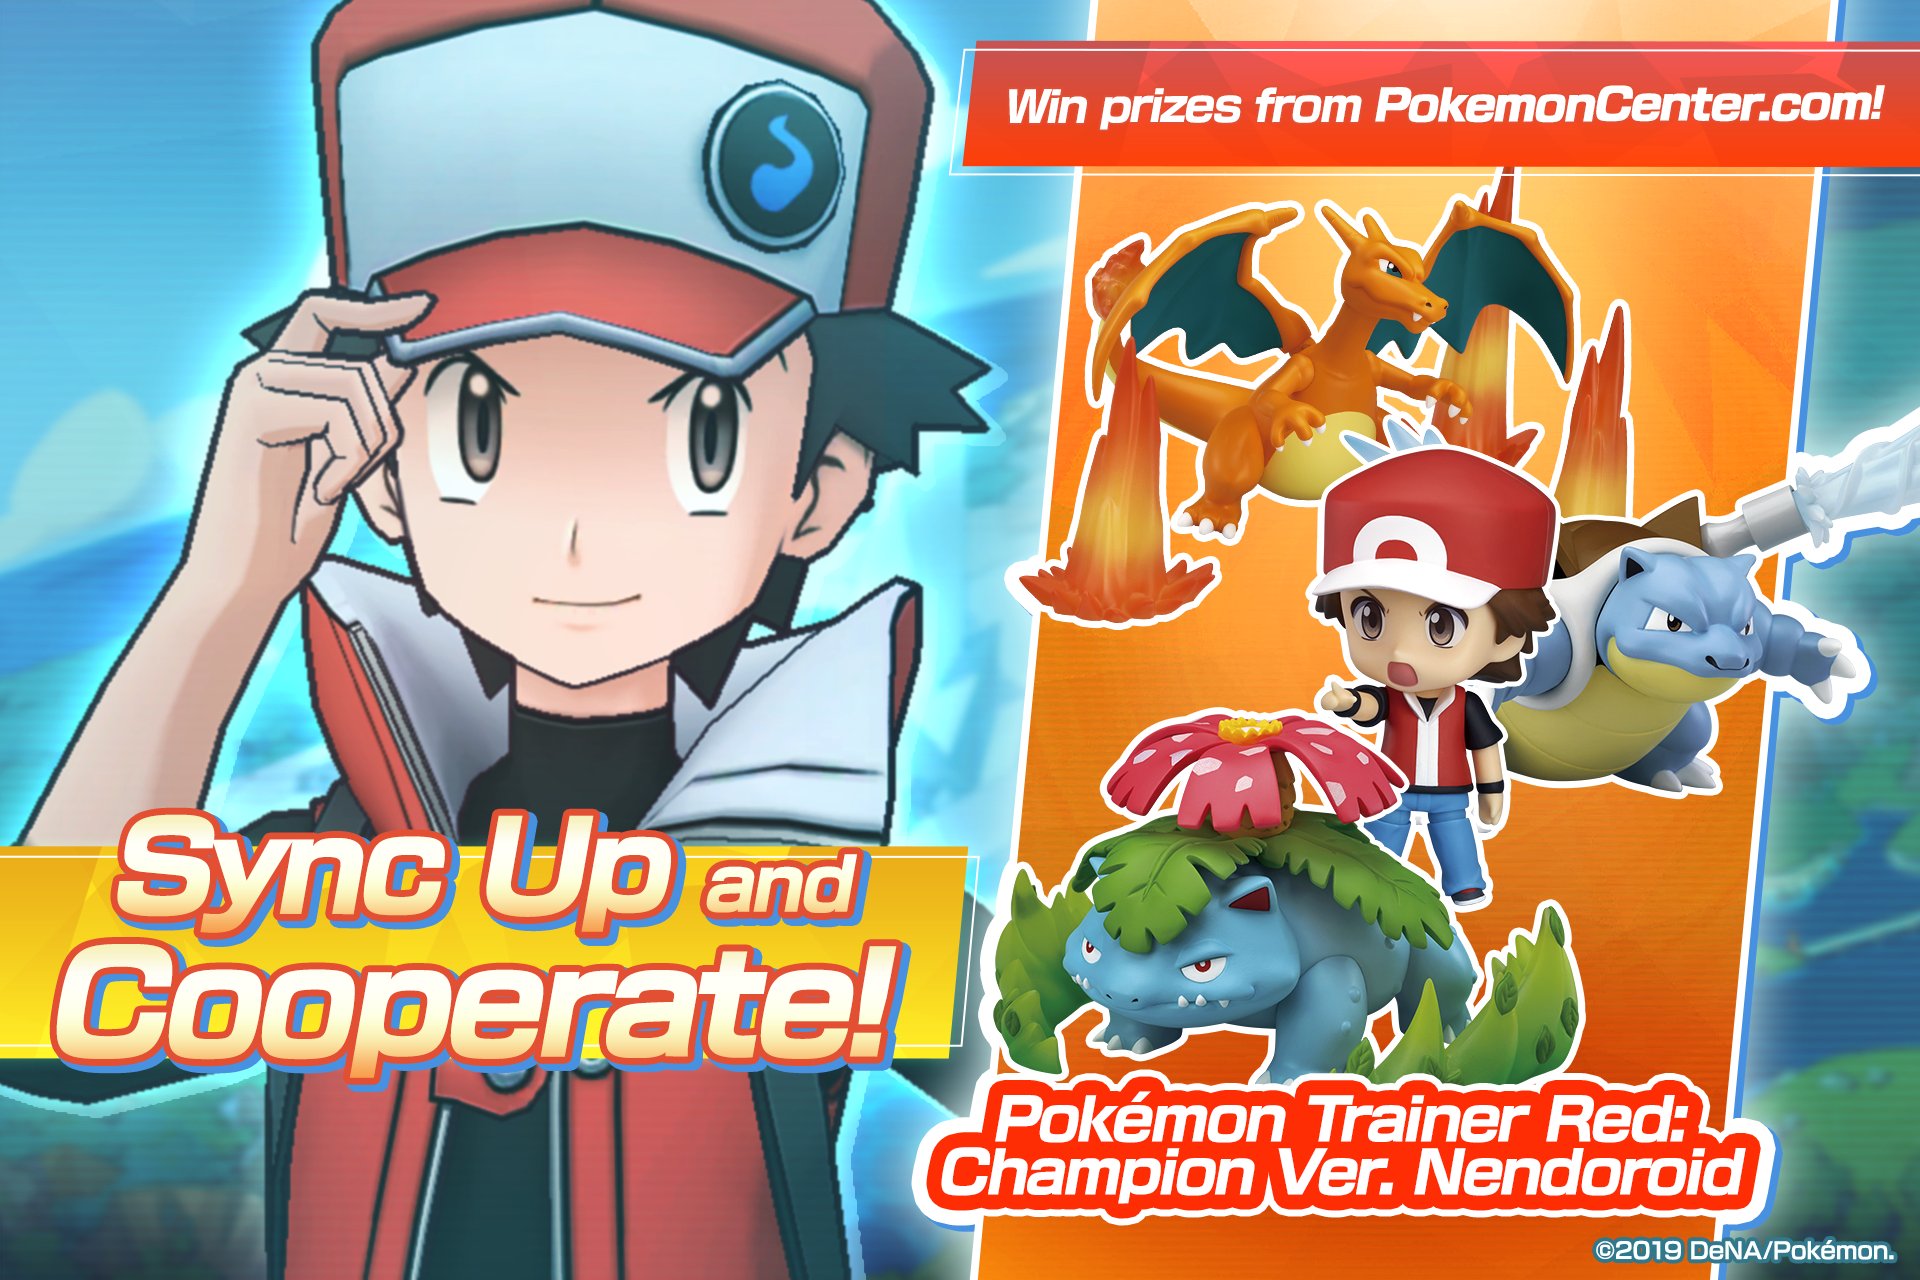 album dyb dommer Pokémon Masters EX on Twitter: "Pokémon Trainer Red: Champion Ver.  Nendoroid is available at the #PokemonCenter! https://t.co/5mYnXqvVtT You  can also win this legendary champion by joining our Sync Up and Cooperate  sweepstakes